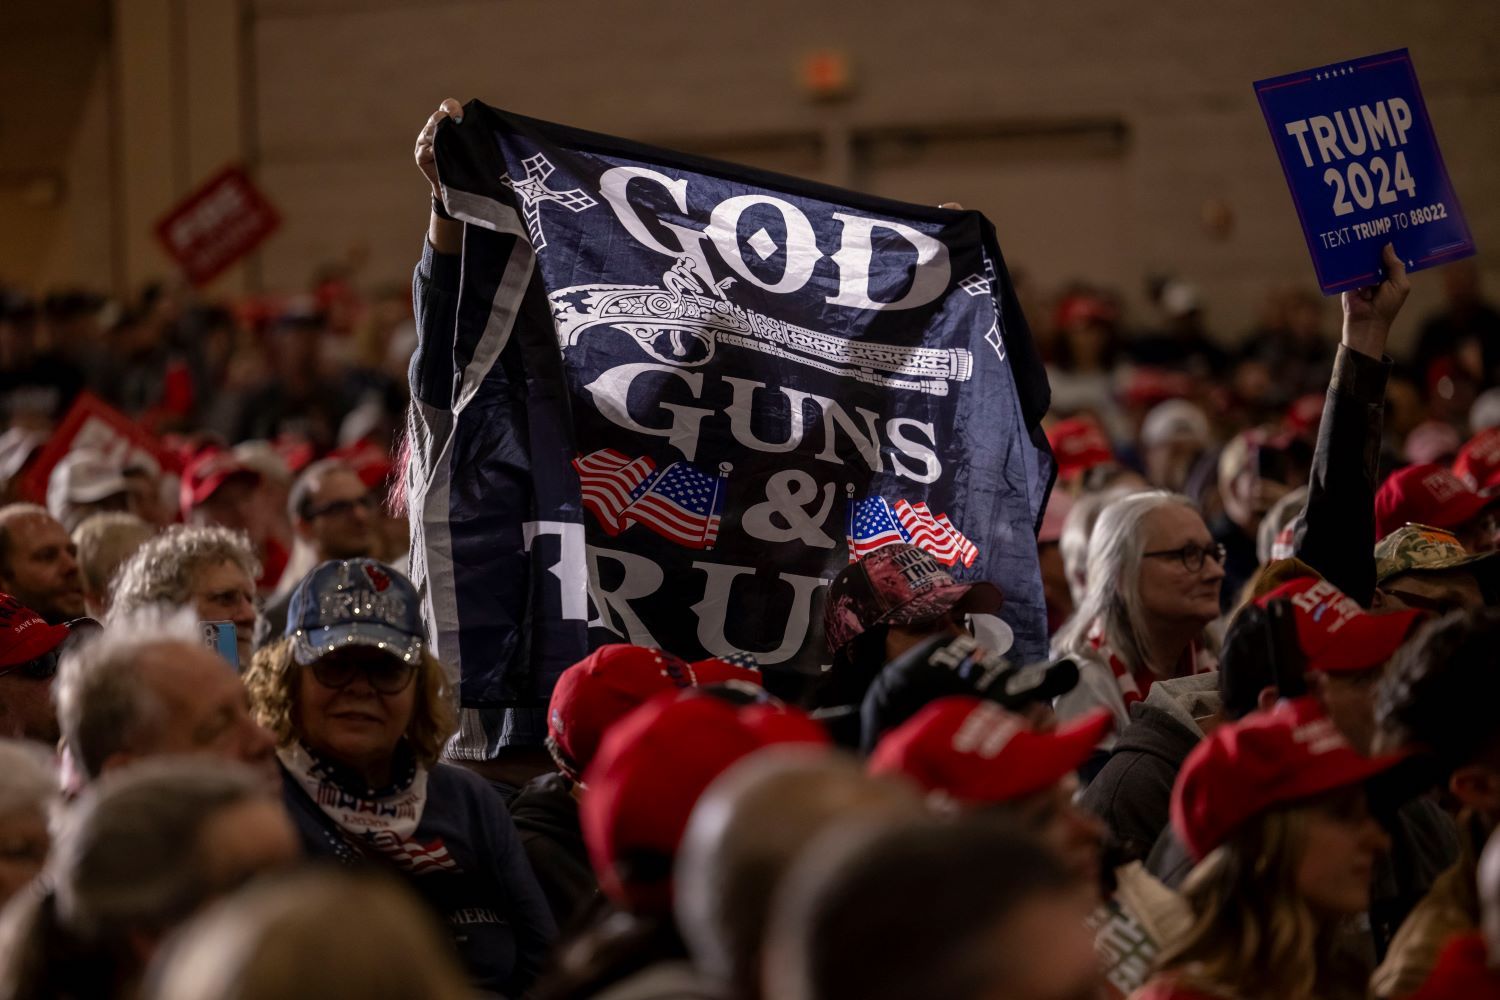 A crowd of people, many wearing red baseball caps. Someone holds up a fabric sign that reads 'God Guns & Trump.' Another sign reads 'Trump 2024.'